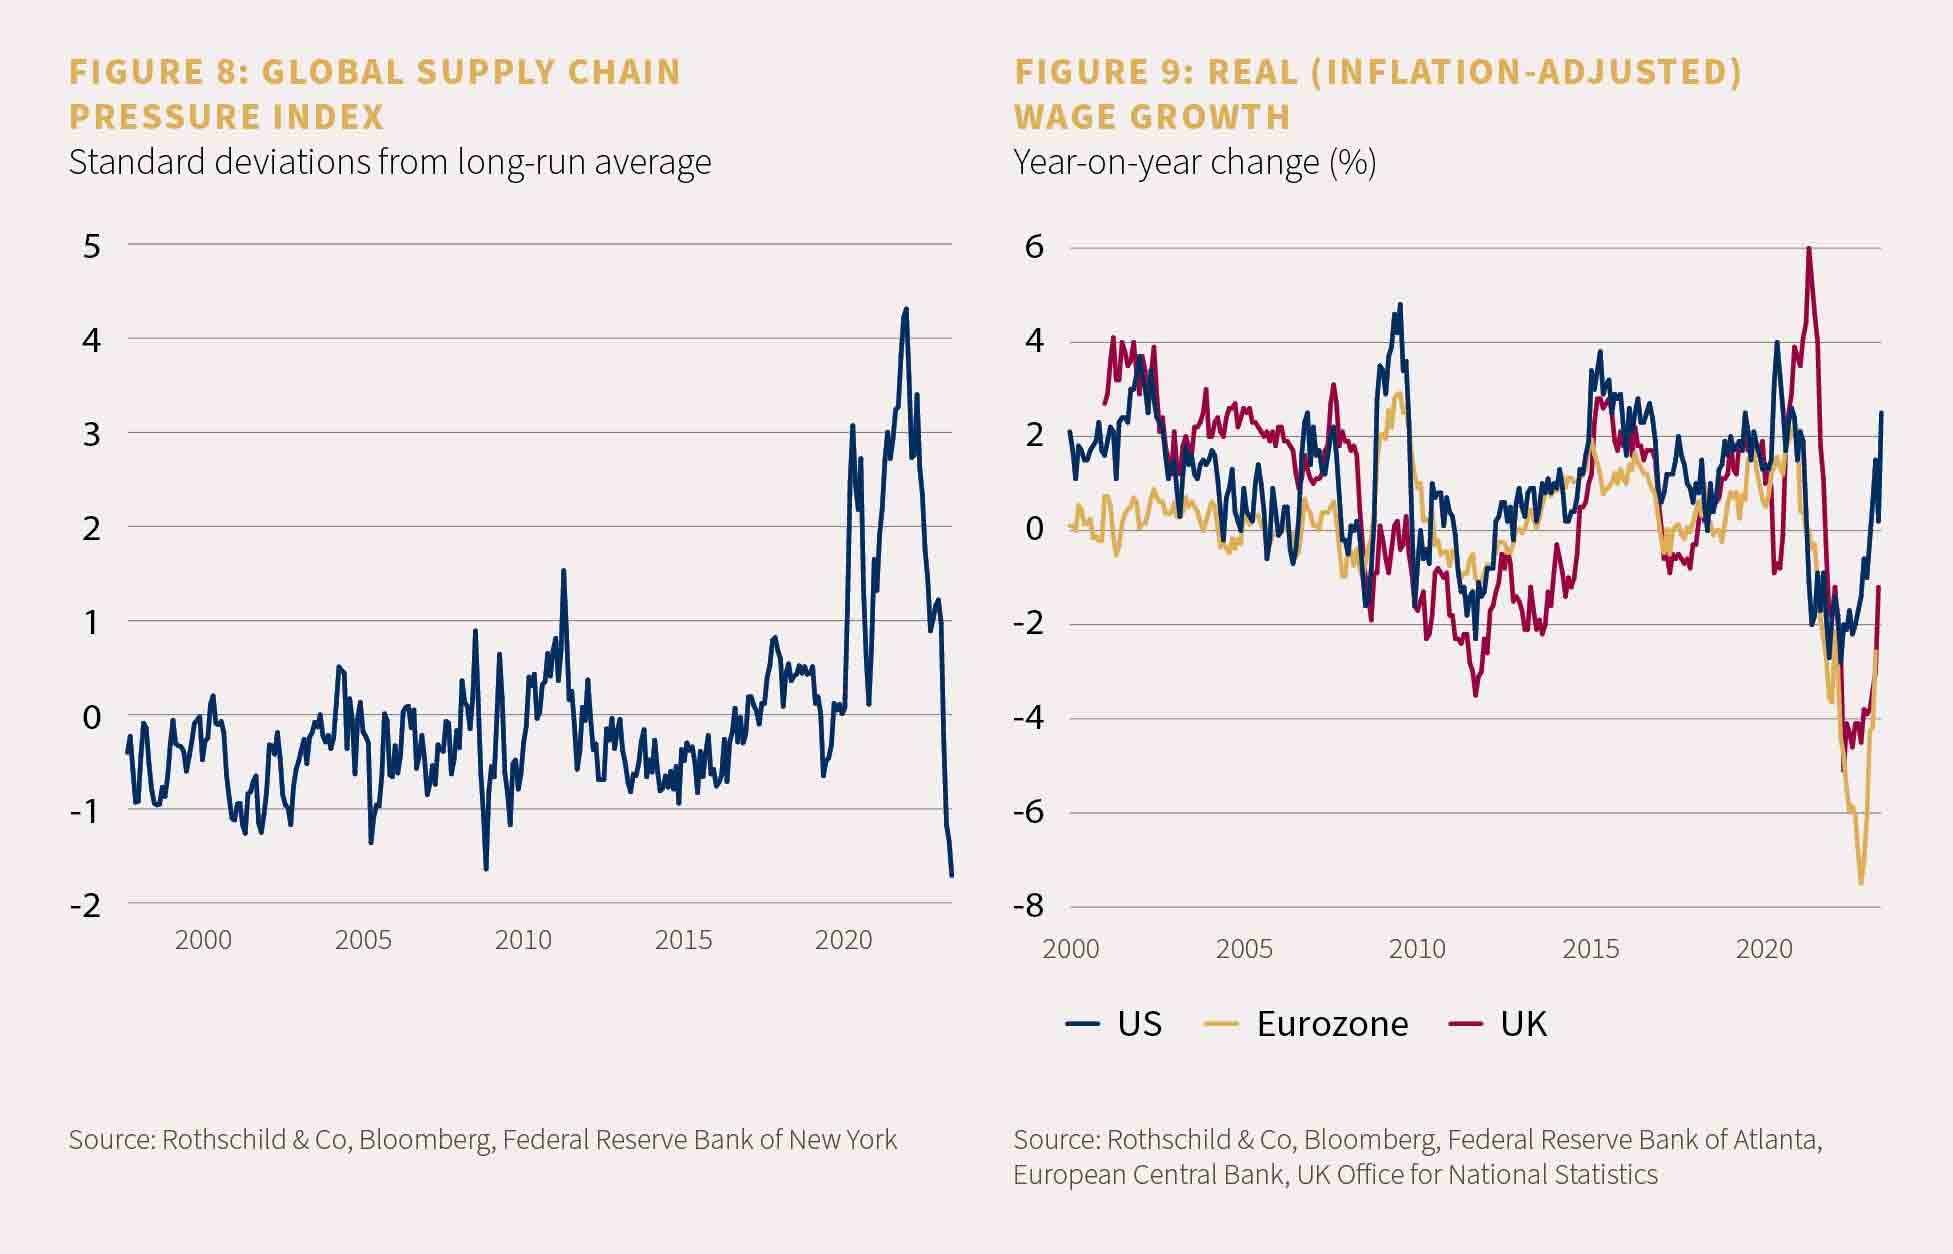 Two charts, one showing the global supply chain pressure index and the other showing real (inflation-adjusted) wage growth